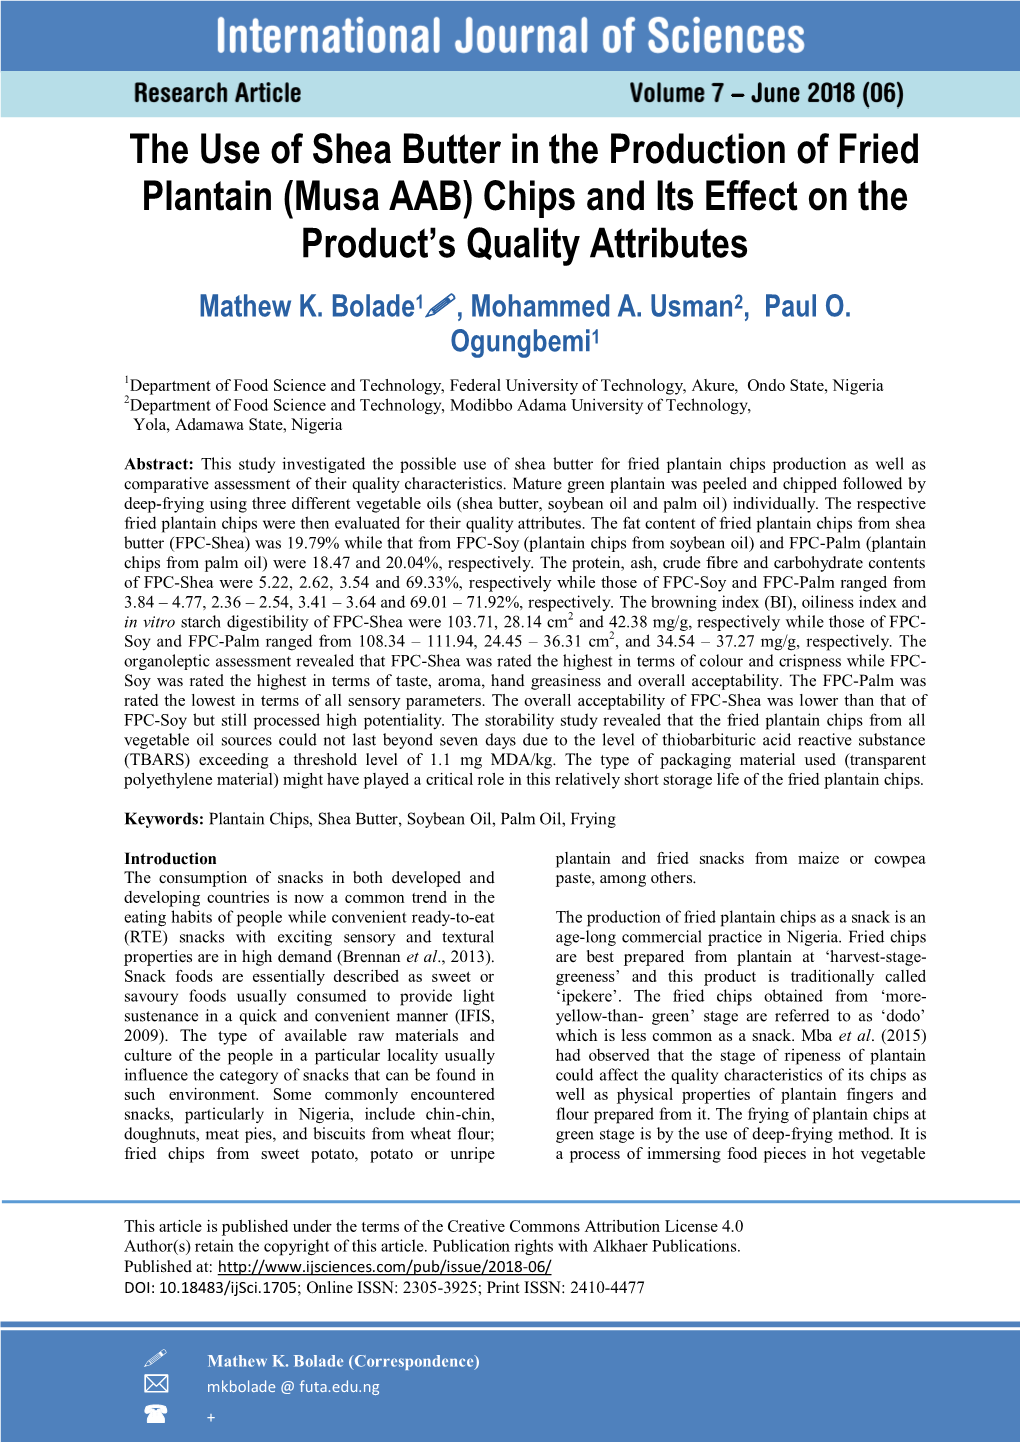 The Use of Shea Butter in the Production of Fried Plantain (Musa AAB) Chips and Its Effect on the Product’S Quality Attributes Mathew K